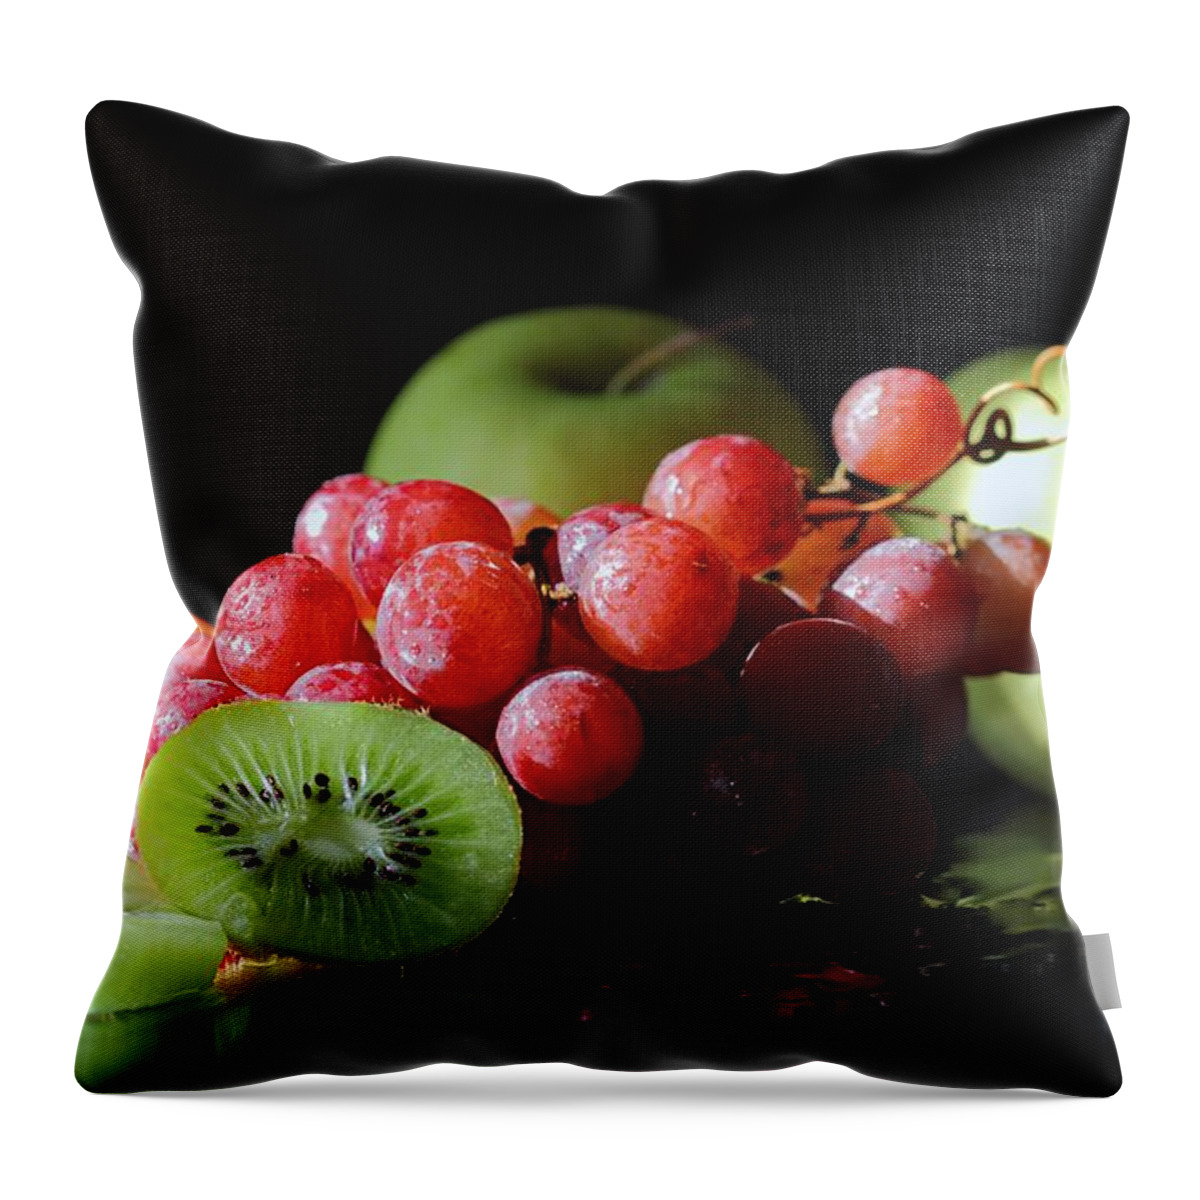 Fruit Throw Pillow featuring the photograph Apples, Grapes and Kiwi by Angela Murdock